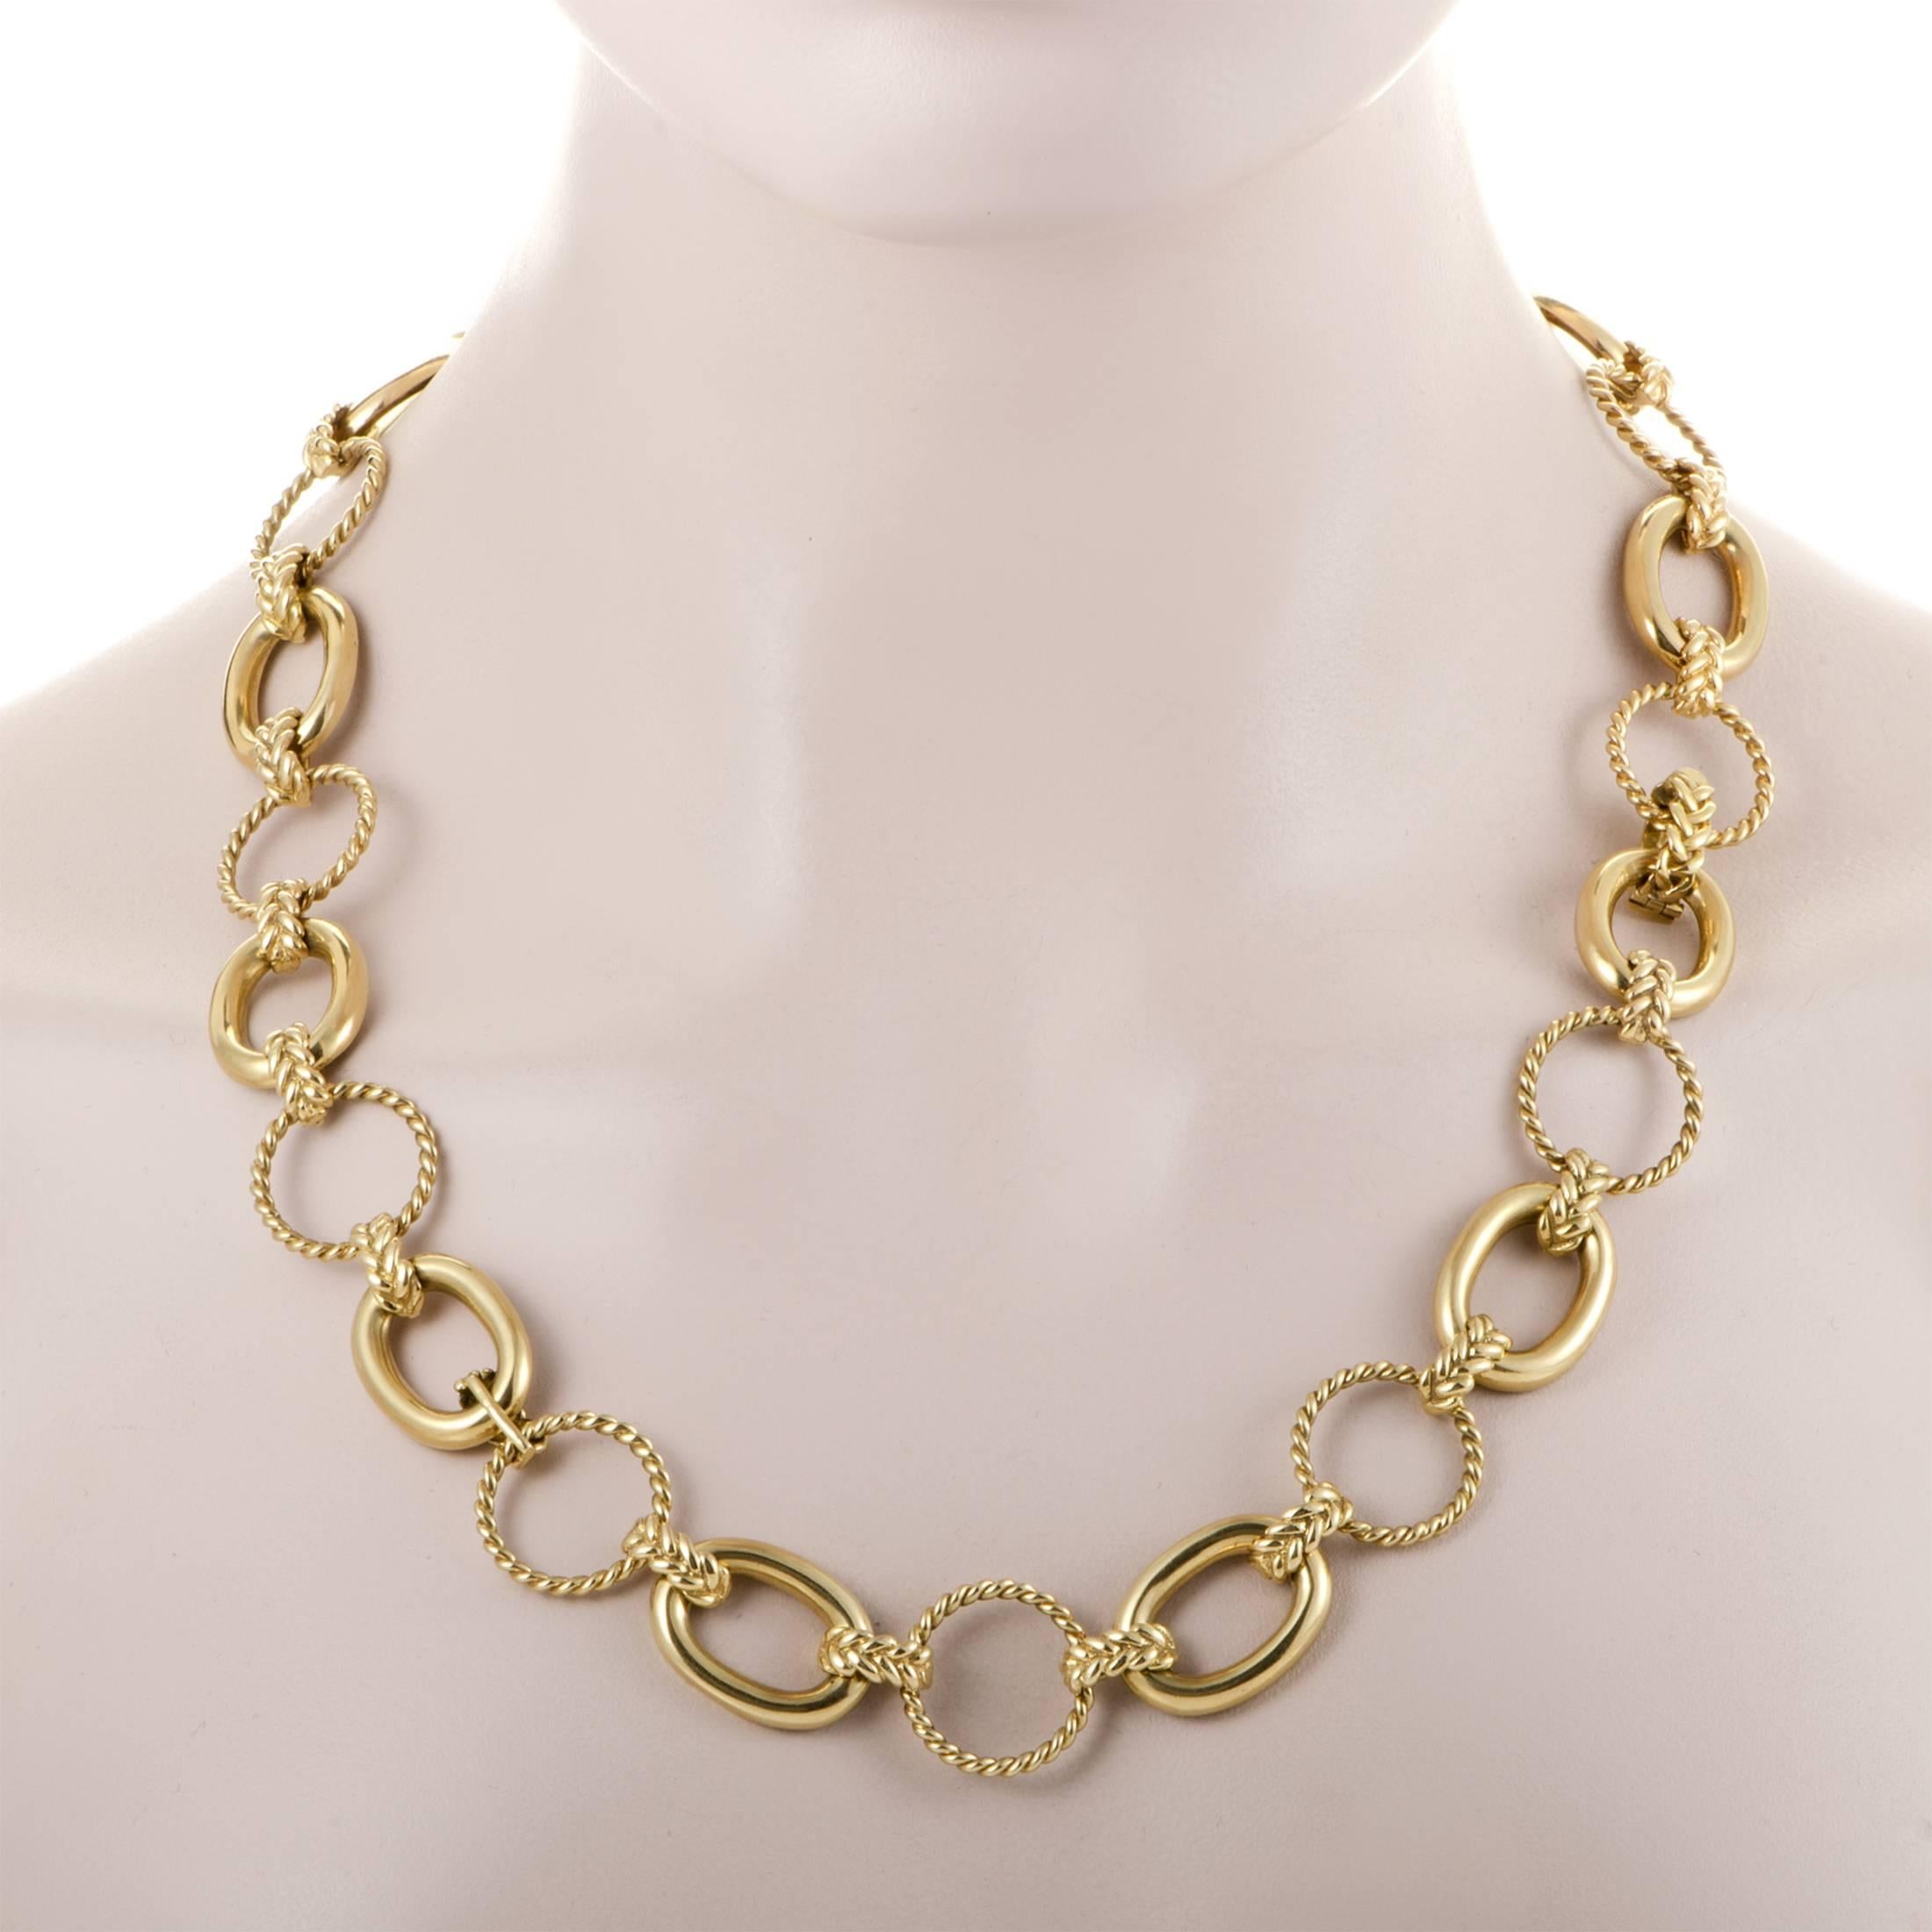 Magnificent vintage style and an irresistible aura of classic luxury make this stunning necklace from Cartier an item of immense allure, with enchanting radiance and intricate ornamentation of 18K yellow gold captivating the beholder.